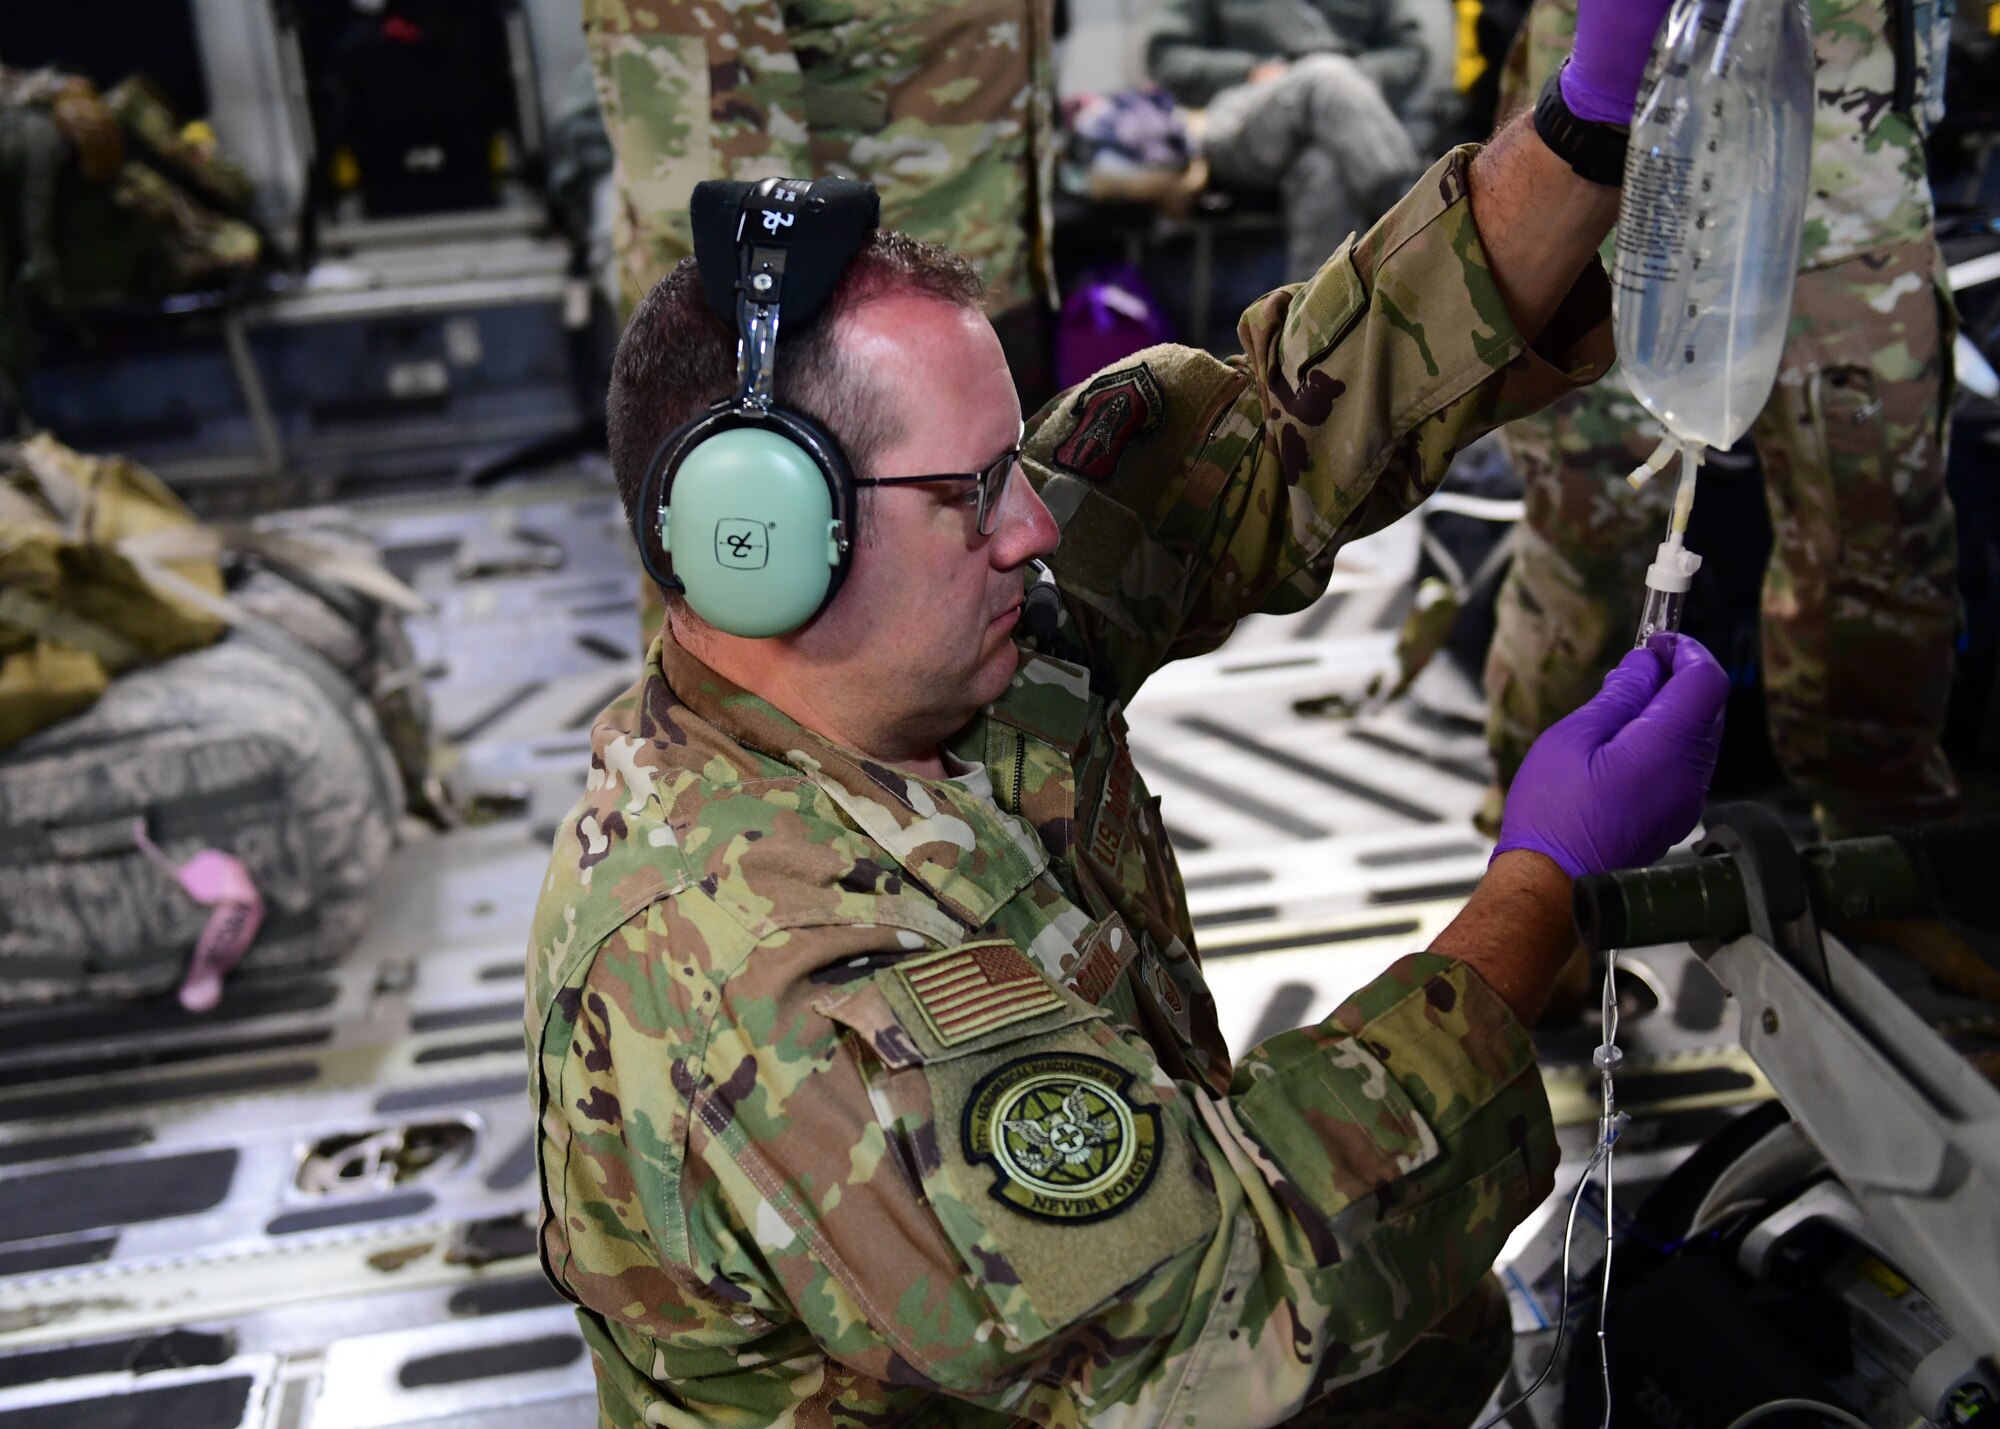 Master Sgt. Joseph Vergona, 911th Aeromedical Evacuation Squadron medical technician, sets up a saline bag near Honolulu, Hawaii April 26, 2019. As a part of the 911th AES Vergona participated in ground training as well as in air training.(U.S. Air Force Photo by Senior Airman Grace Thomson)